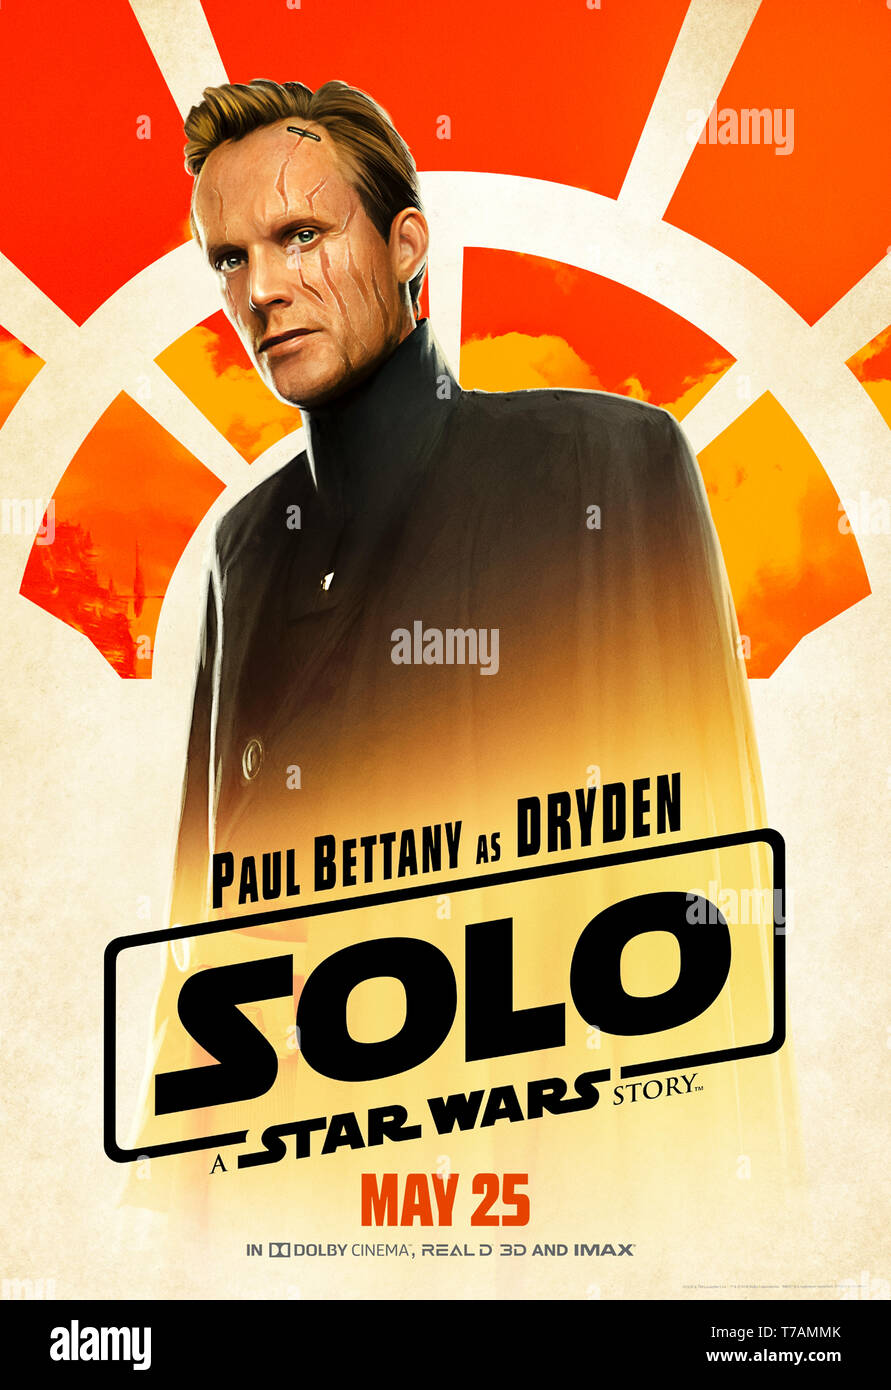 Solo: A Star Wars Story (2018) directed by Ron Howard and starring Paul Bettany as Dryden Vos. Stock Photo